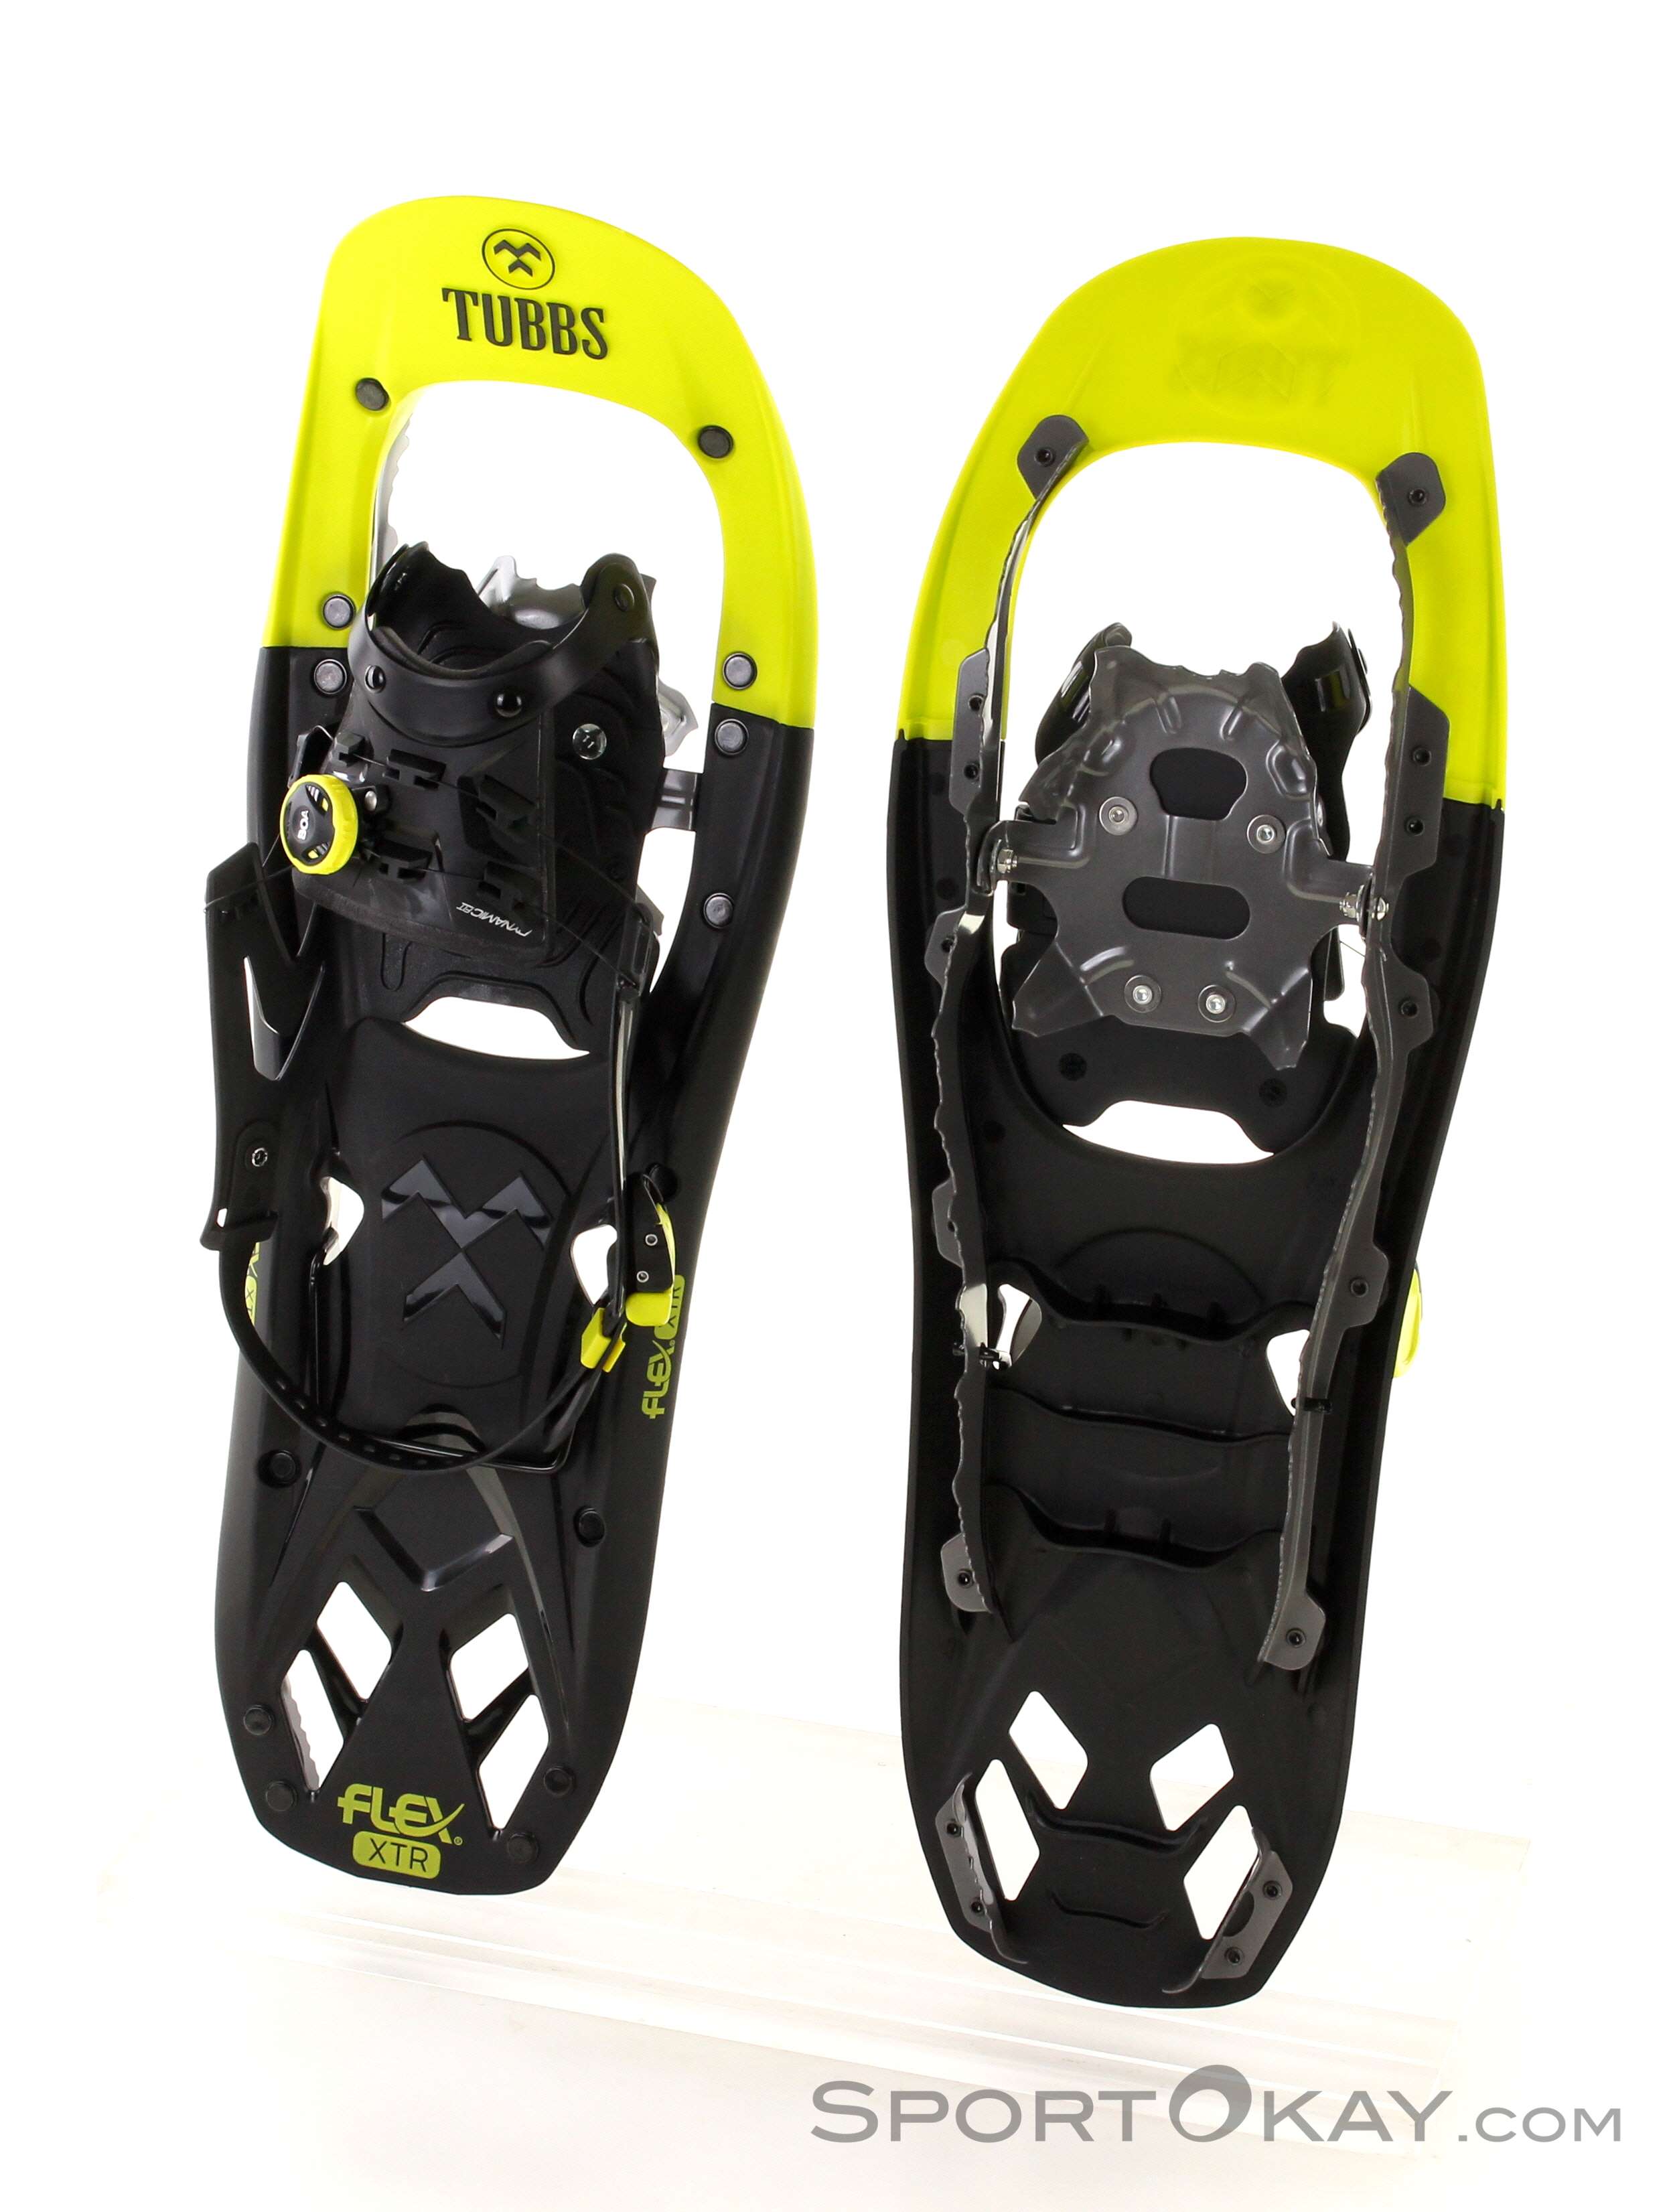 Tubbs Women's Flex TRK KIT Day Hiking Snowshoes 通販